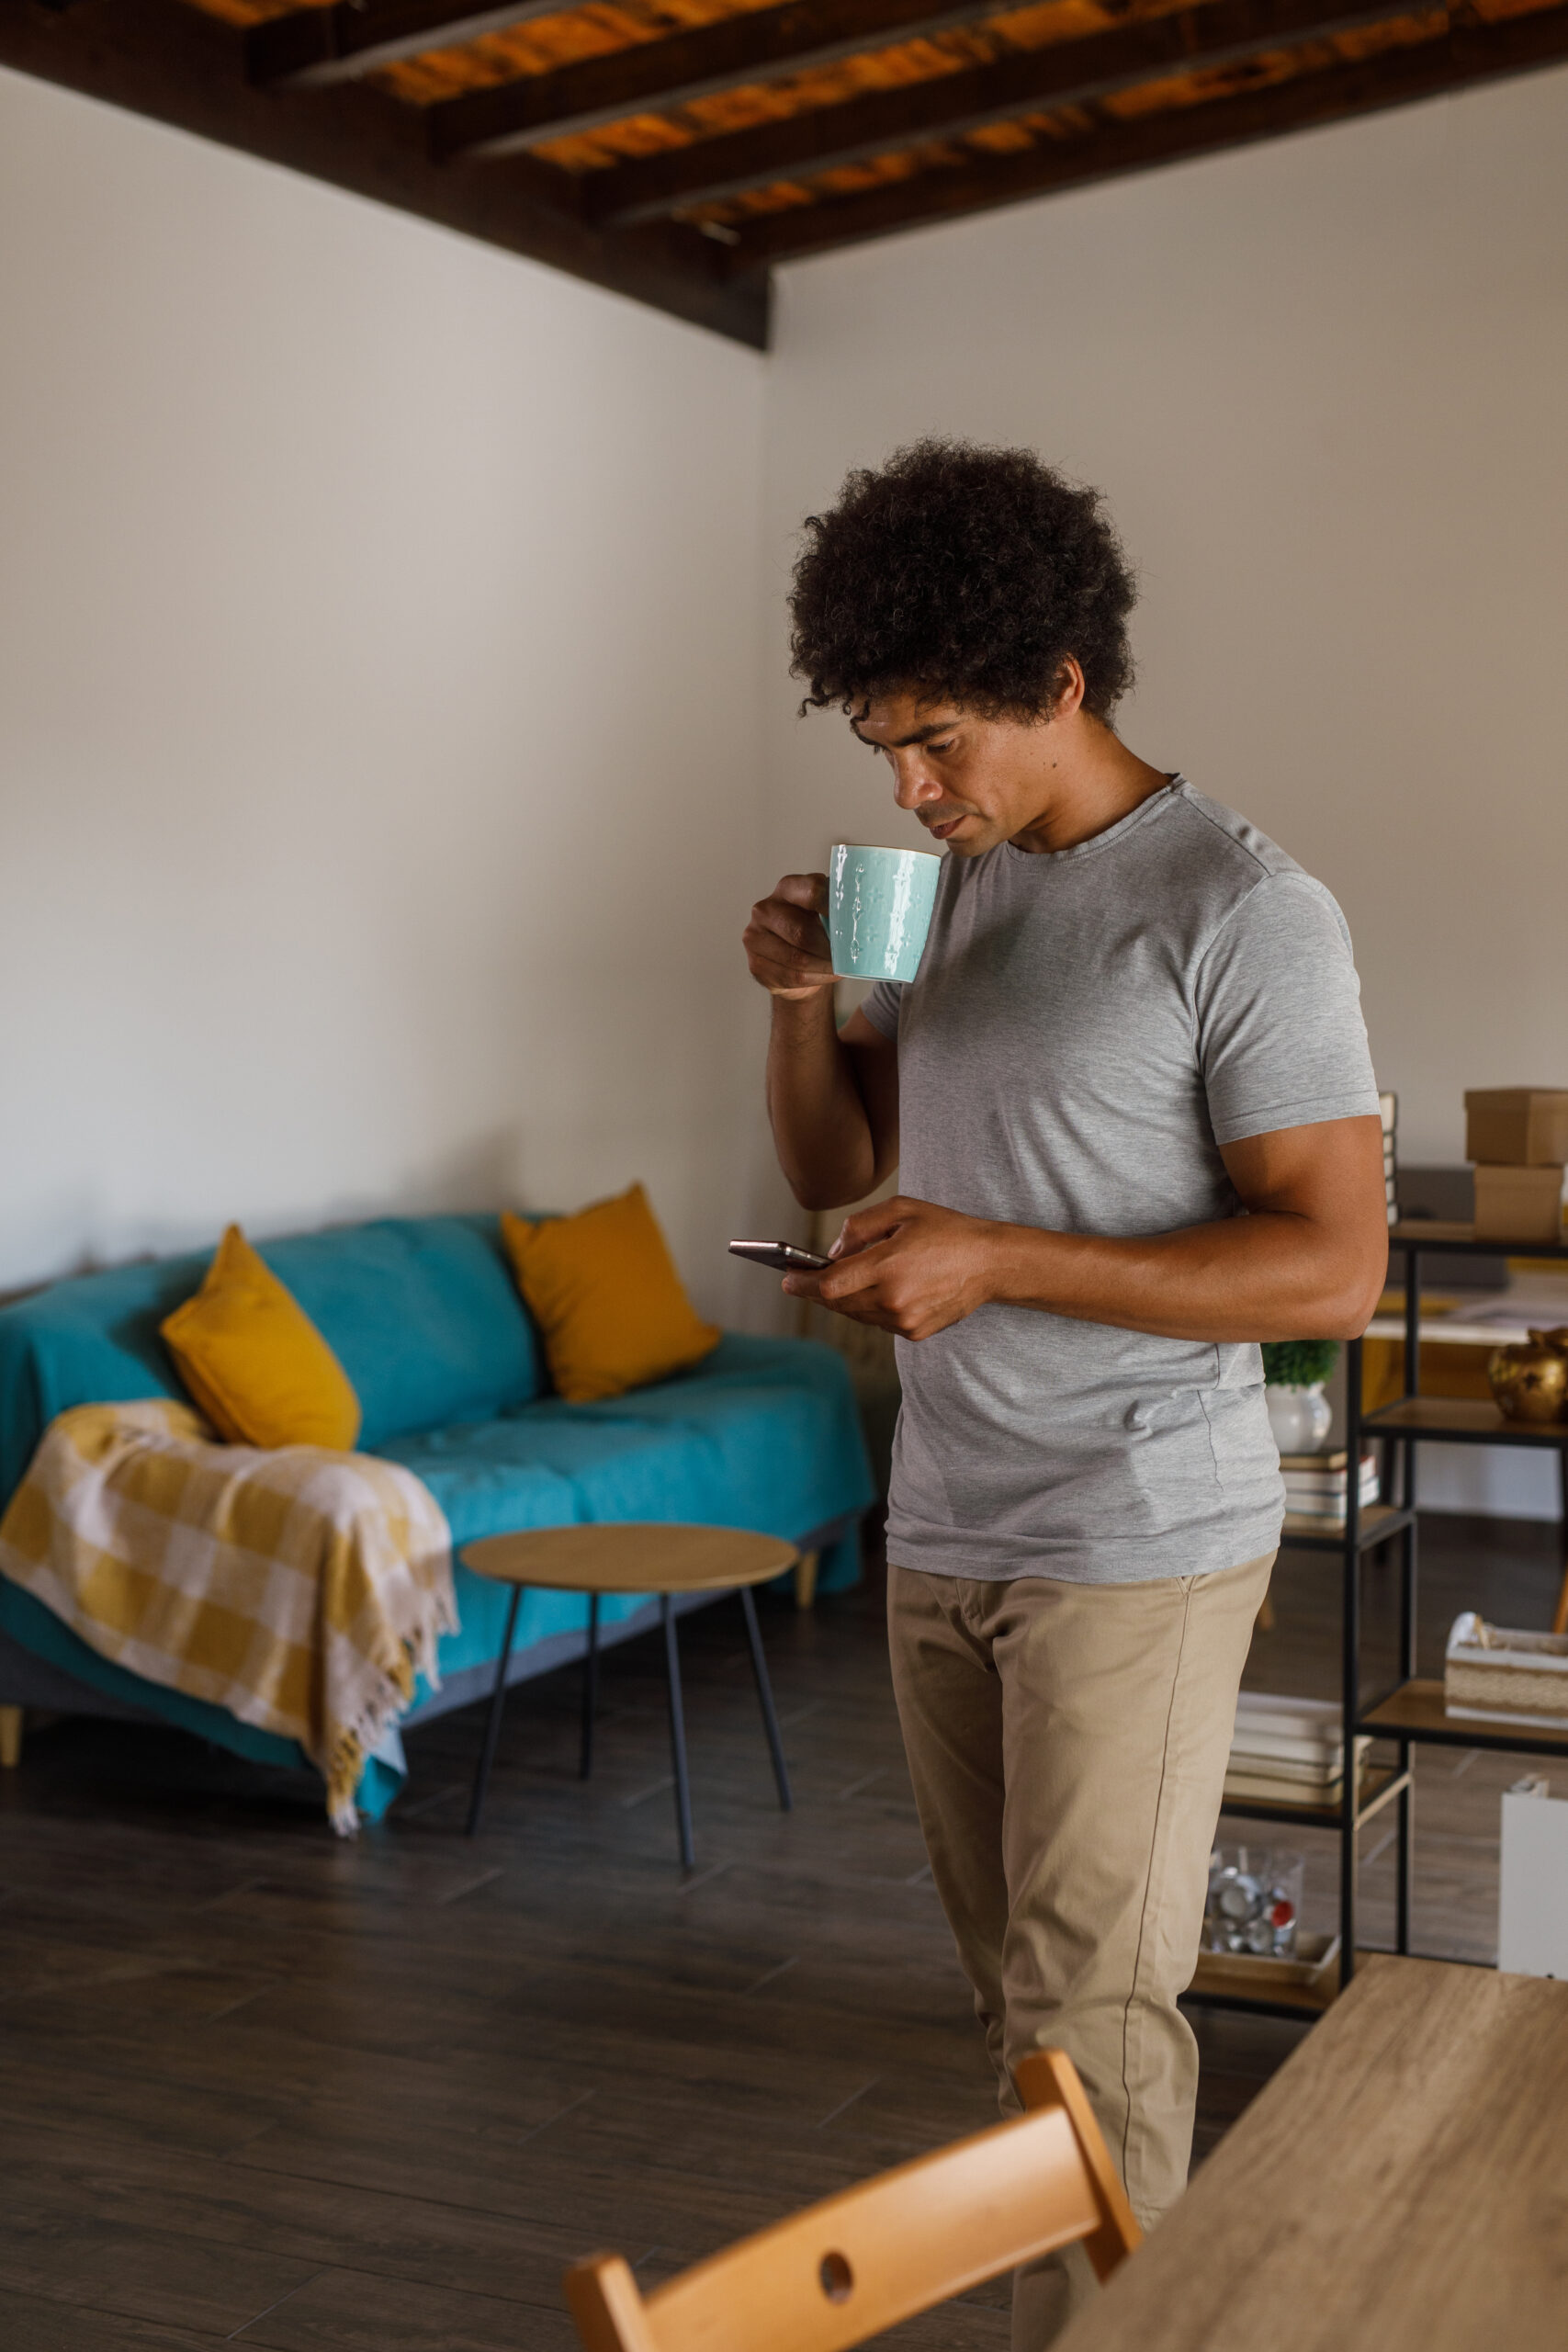 Candid shot of happy mid adult man walking through his tidy home, enjoying a cup of coffee and scrolling through funny memes online via smart phone.